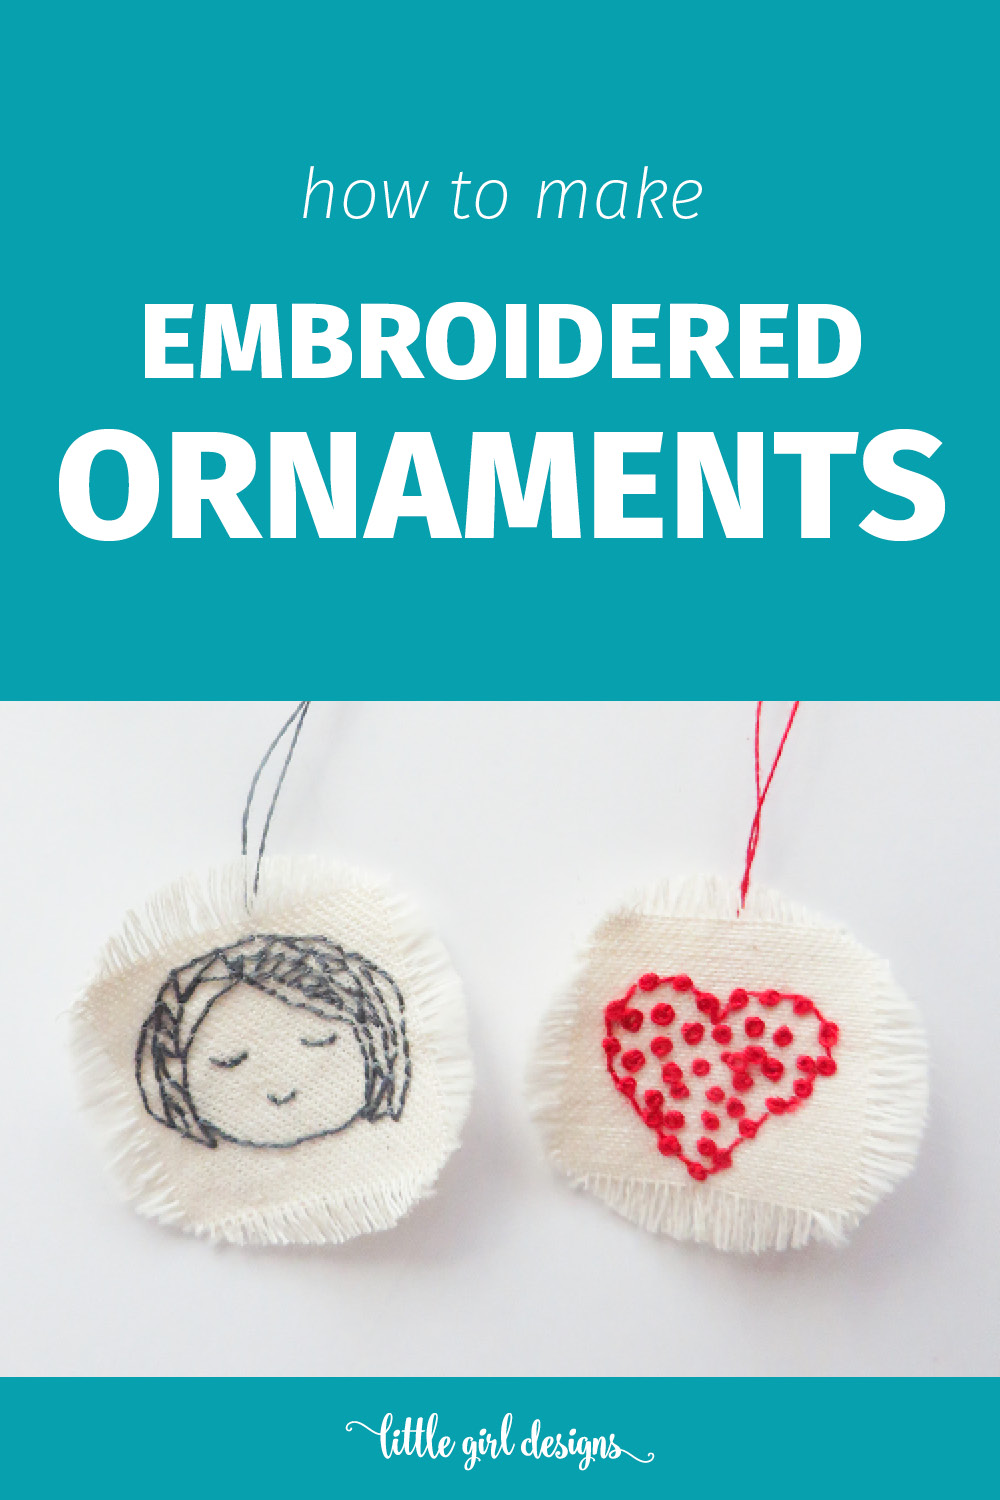 Make Your Own Embroidered Ornaments